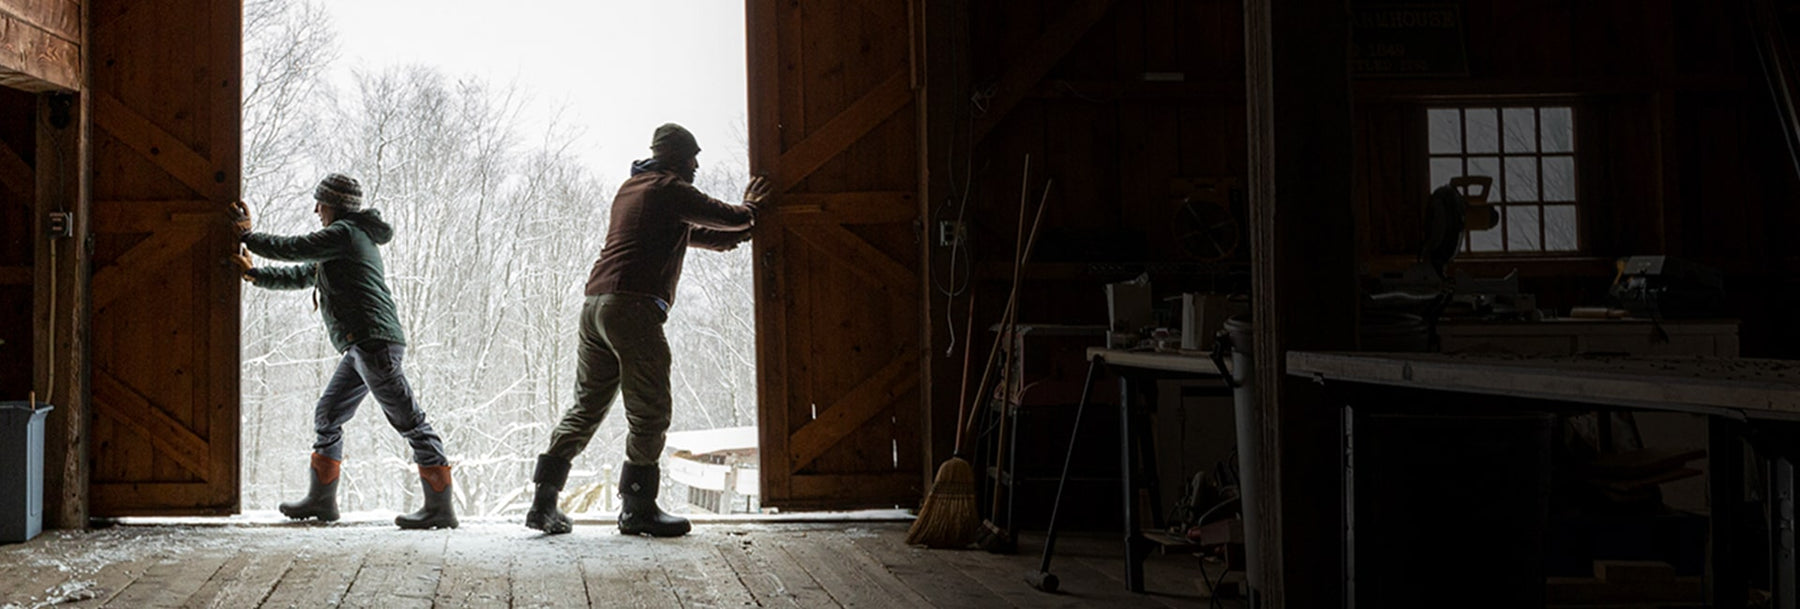 Two people wearing Muck Boot wellingtons, pushing barn doors open with a snowy scene outside